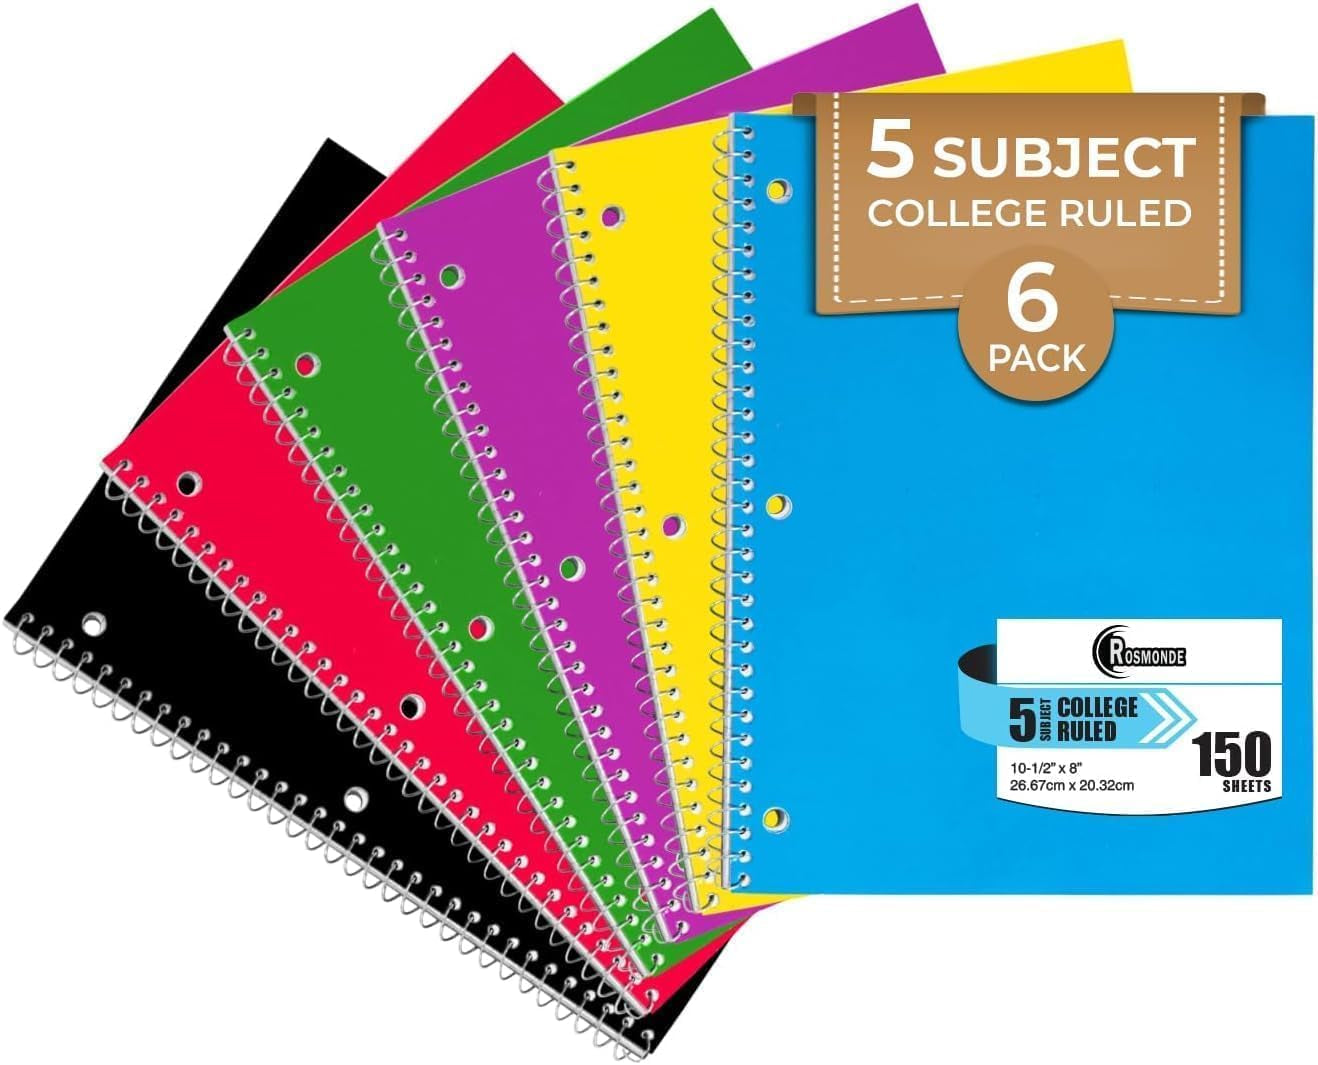 Spiral Notebook, 12 Pack, 1 Subject, College Ruled, 70 Sheets, 8 X 10-1/2", 3 Hole Punched, Bulk College Ruled Spiral Notebook for School, Single Subject Spiral Notebook Bulk, Assorted Colors